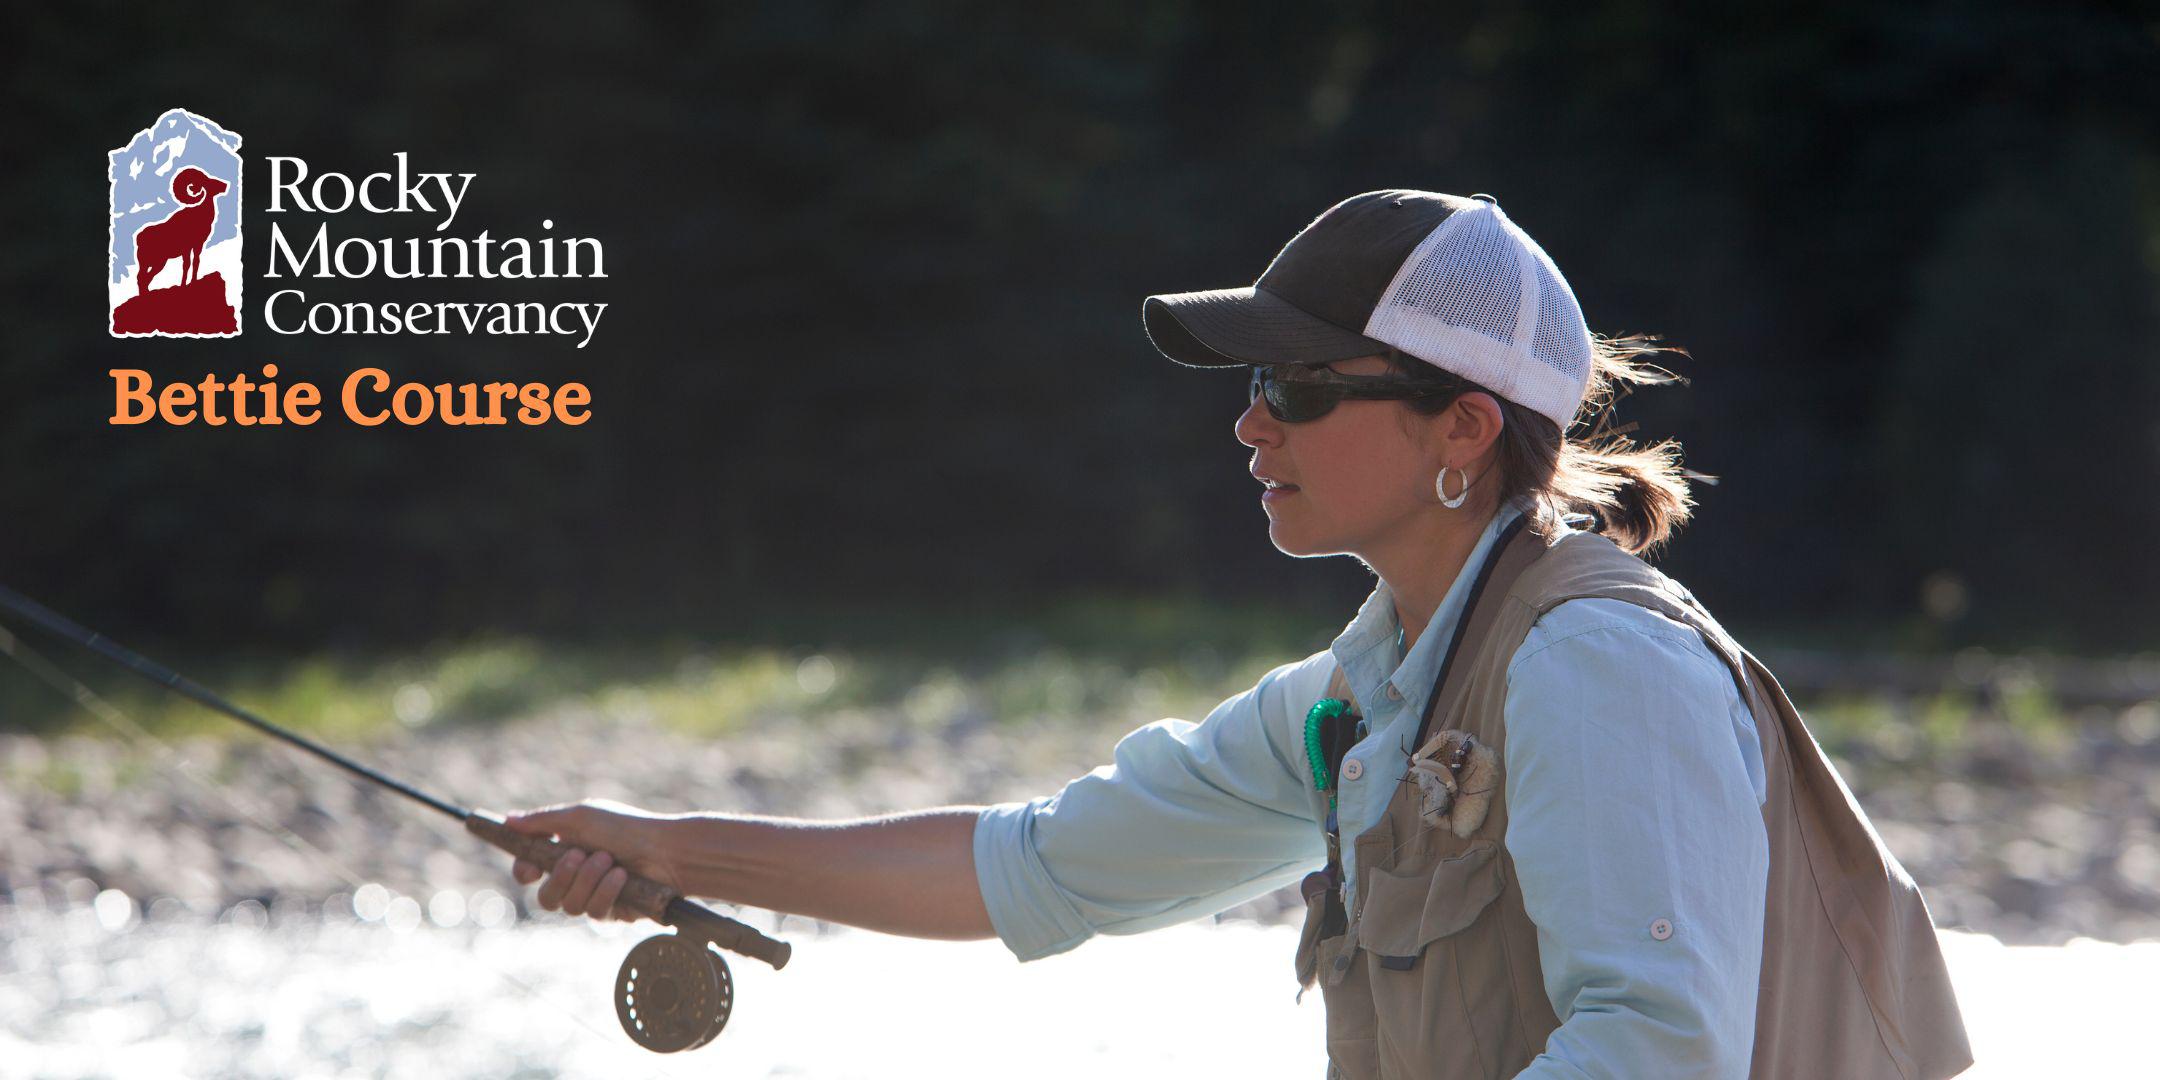 Bettie Course: Stream Ecology and Fly-Fishing Tickets, Sat, Aug 17